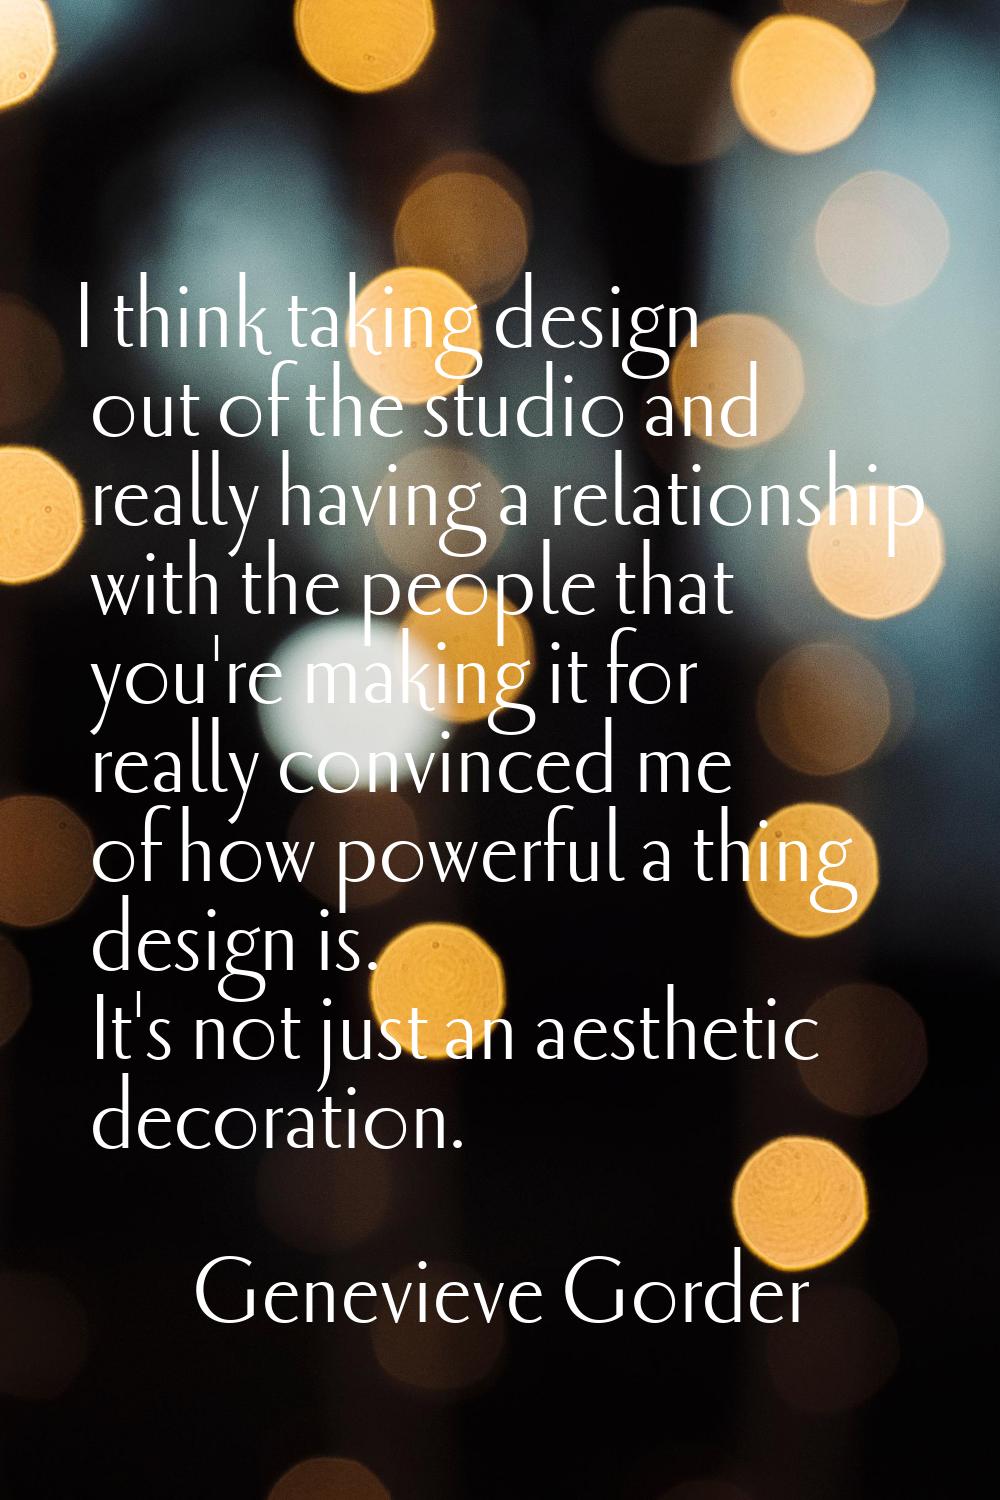 I think taking design out of the studio and really having a relationship with the people that you'r